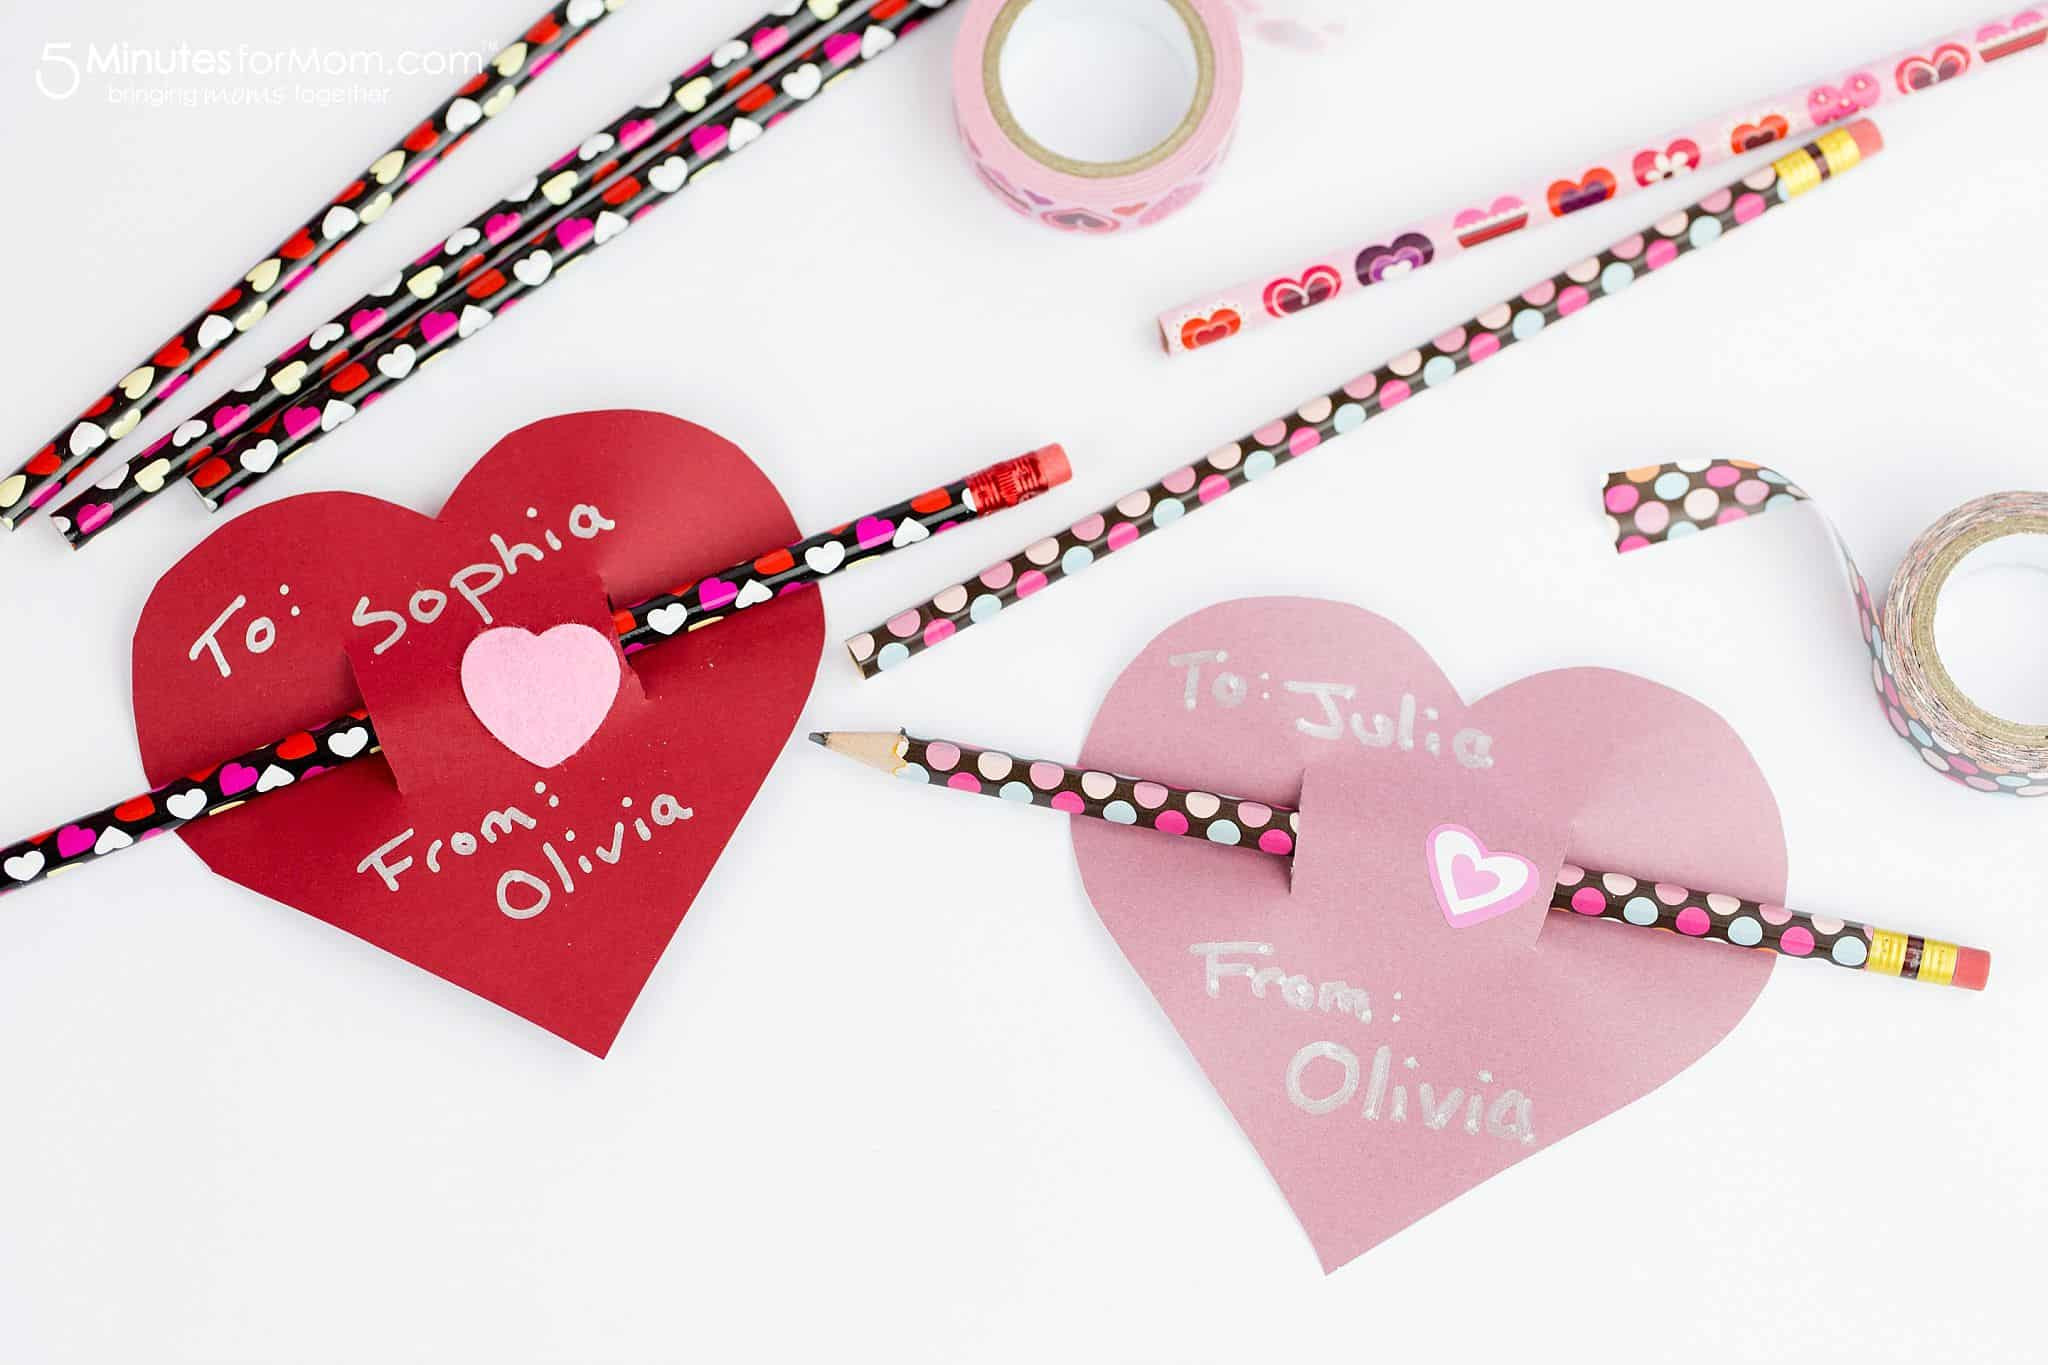 Valentines Gift Ideas For Mom
 Fast and Easy Dollar Store Valentine Ideas 5 Minutes for Mom